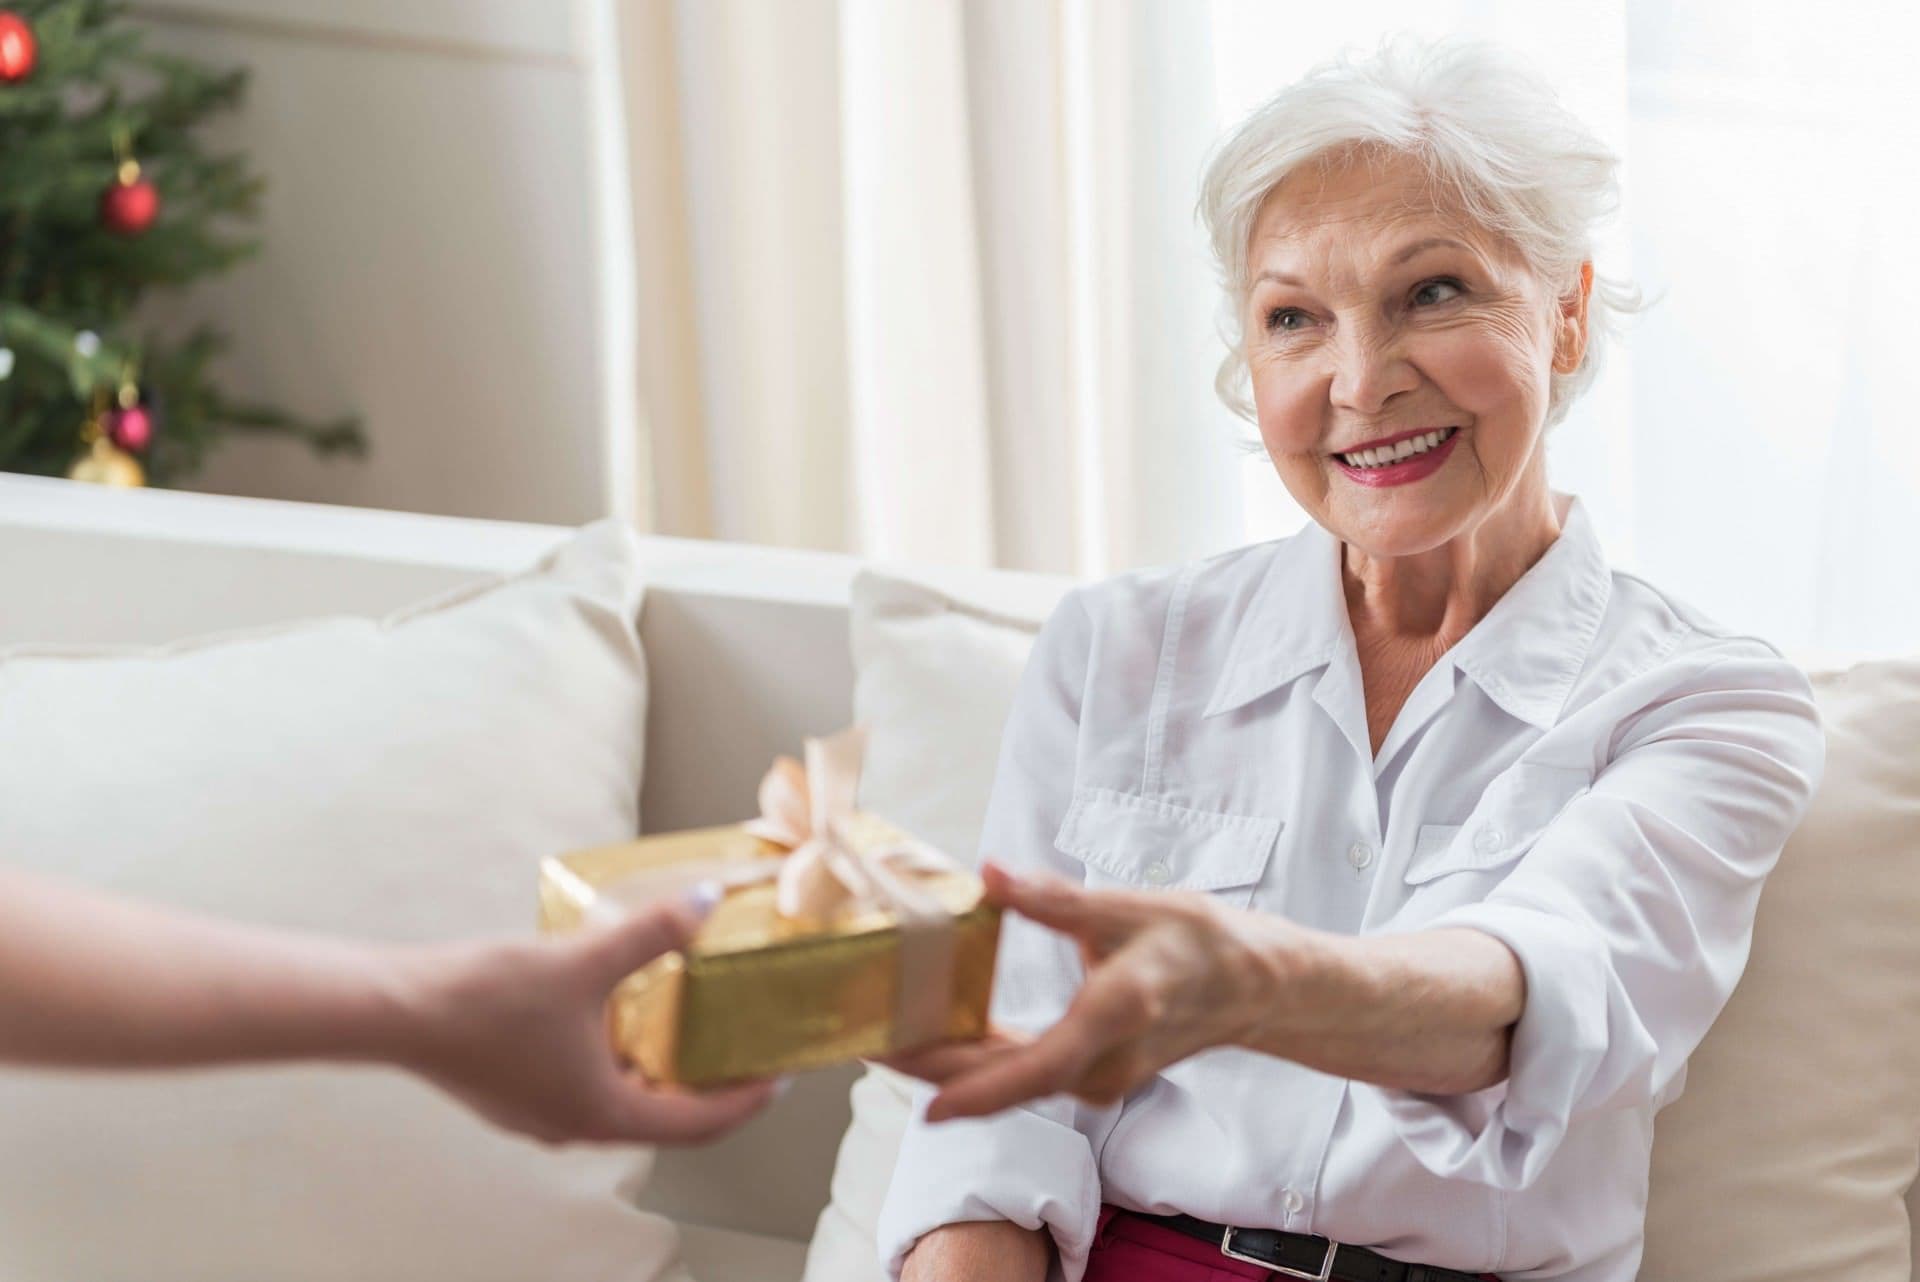 10 Holiday Gift Ideas for Senior Citizens in Your Life